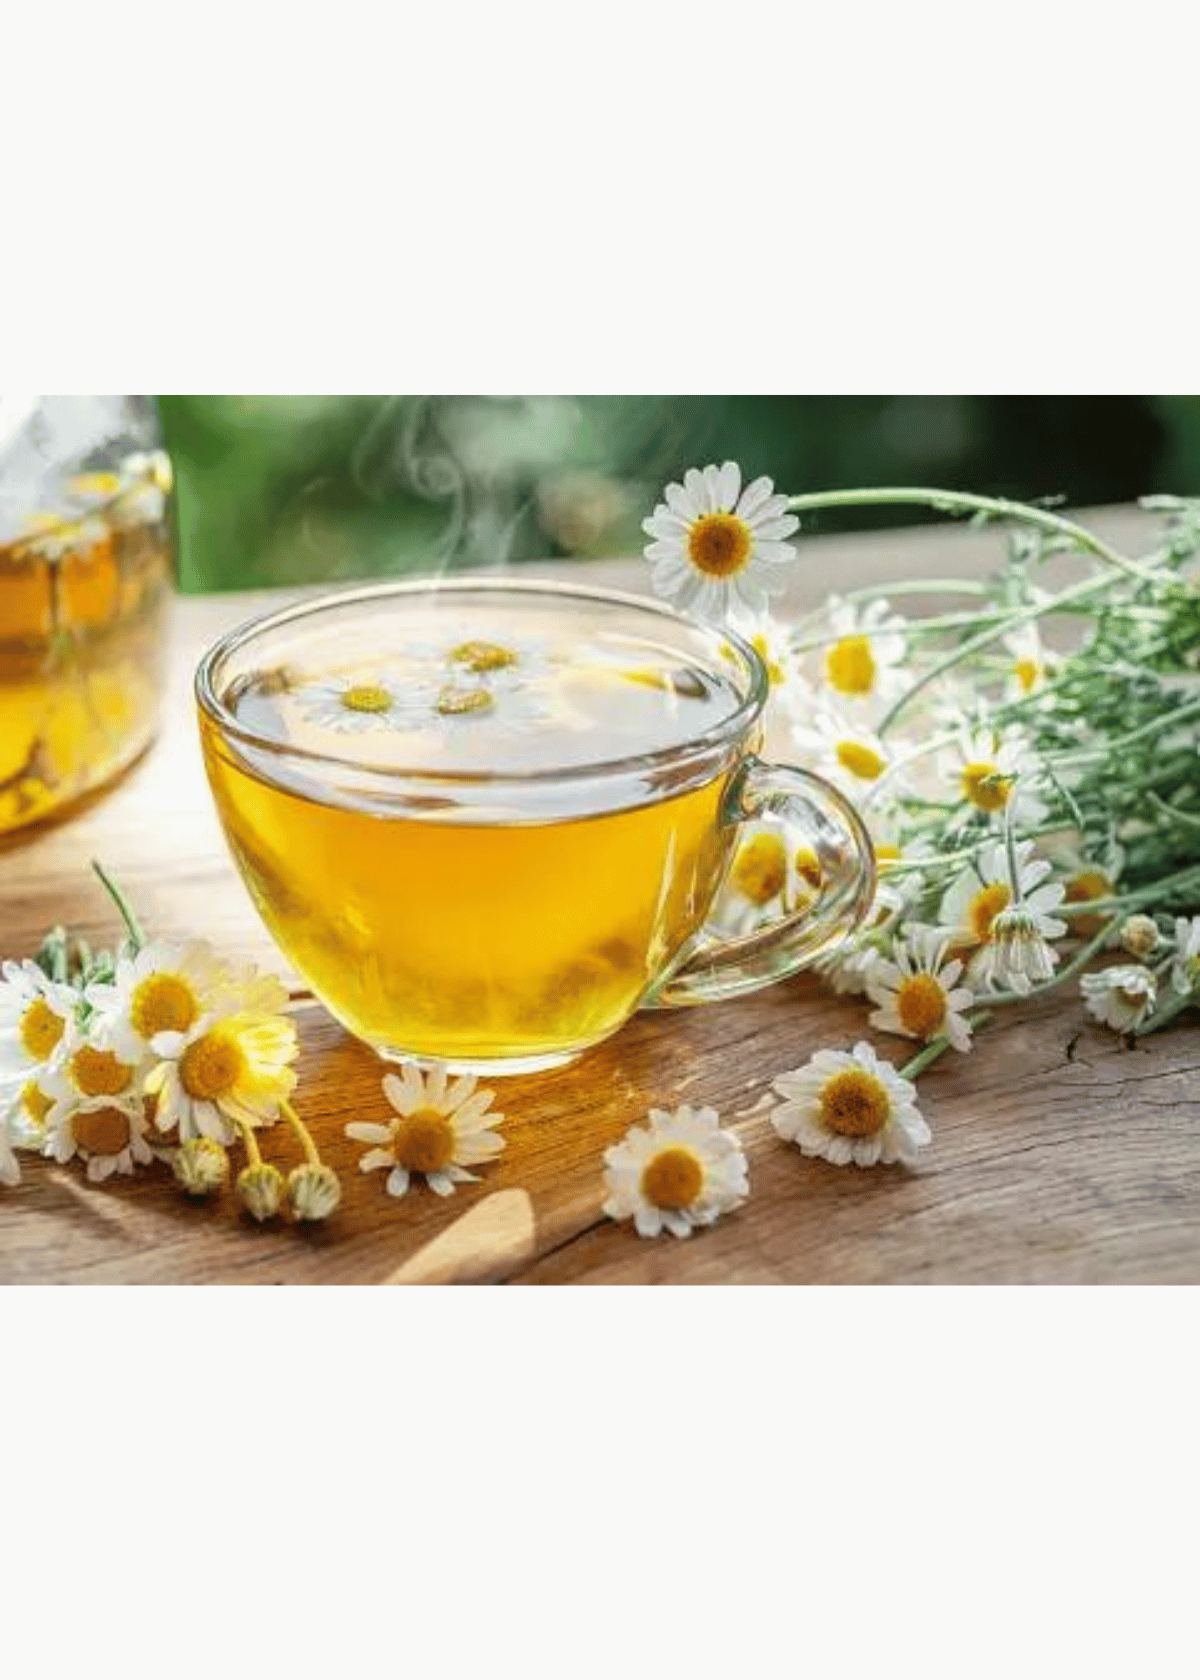 Get a Good Night’s Sleep and Relaxation with Chamomile Tea!